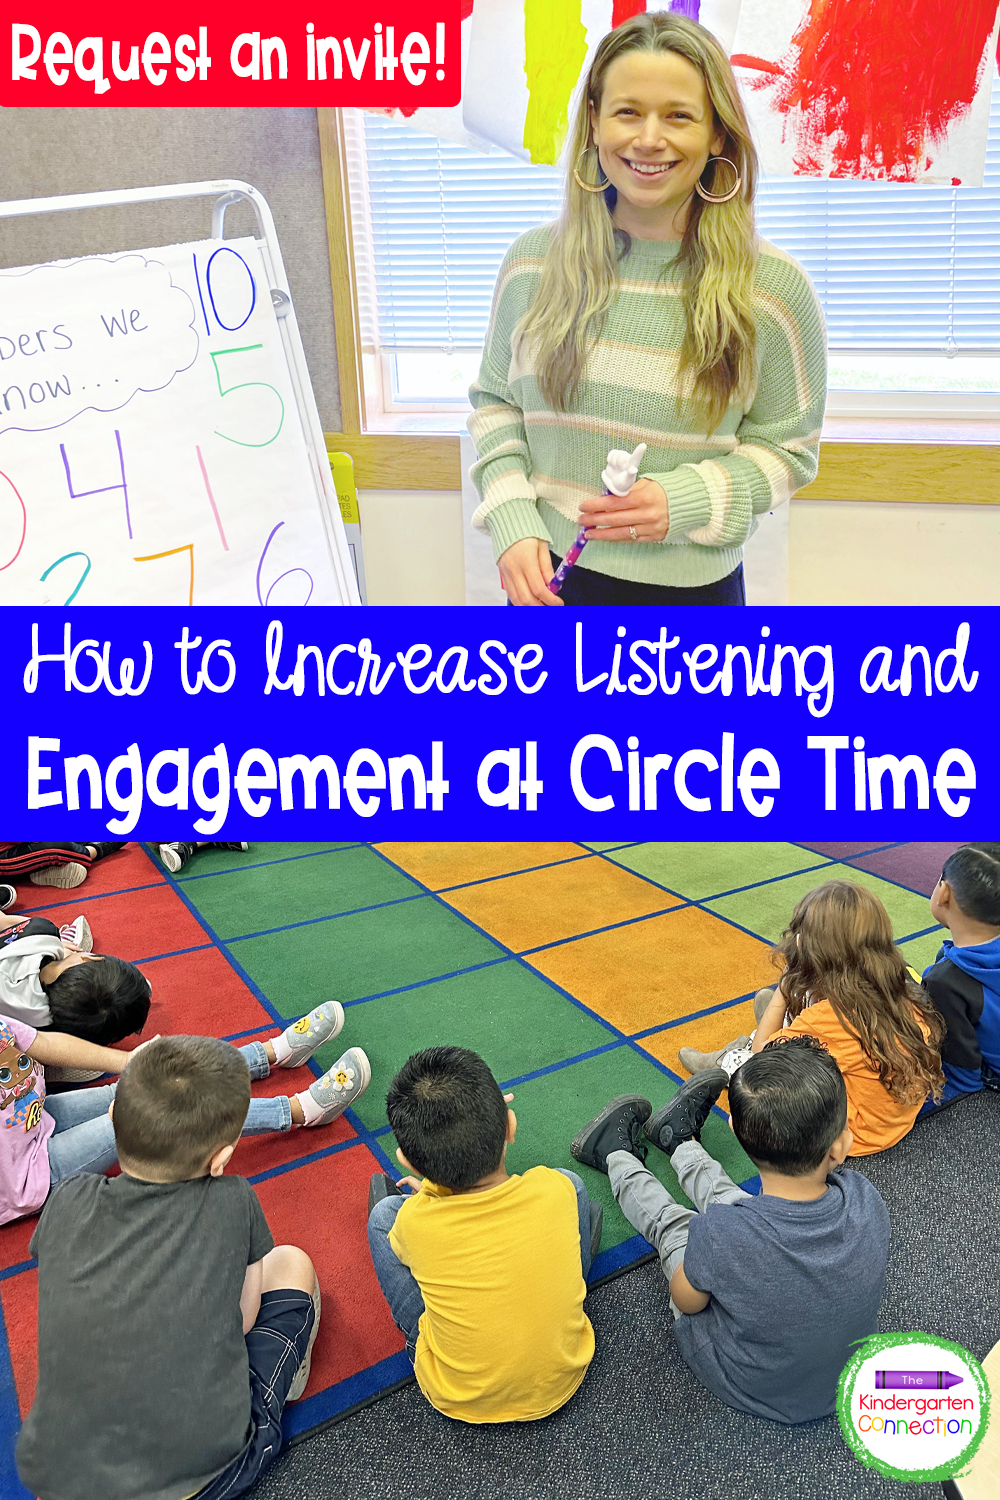 This FREE webinar is filled with Circle Time tips and strategies that are guaranteed to increase listening and engagement!